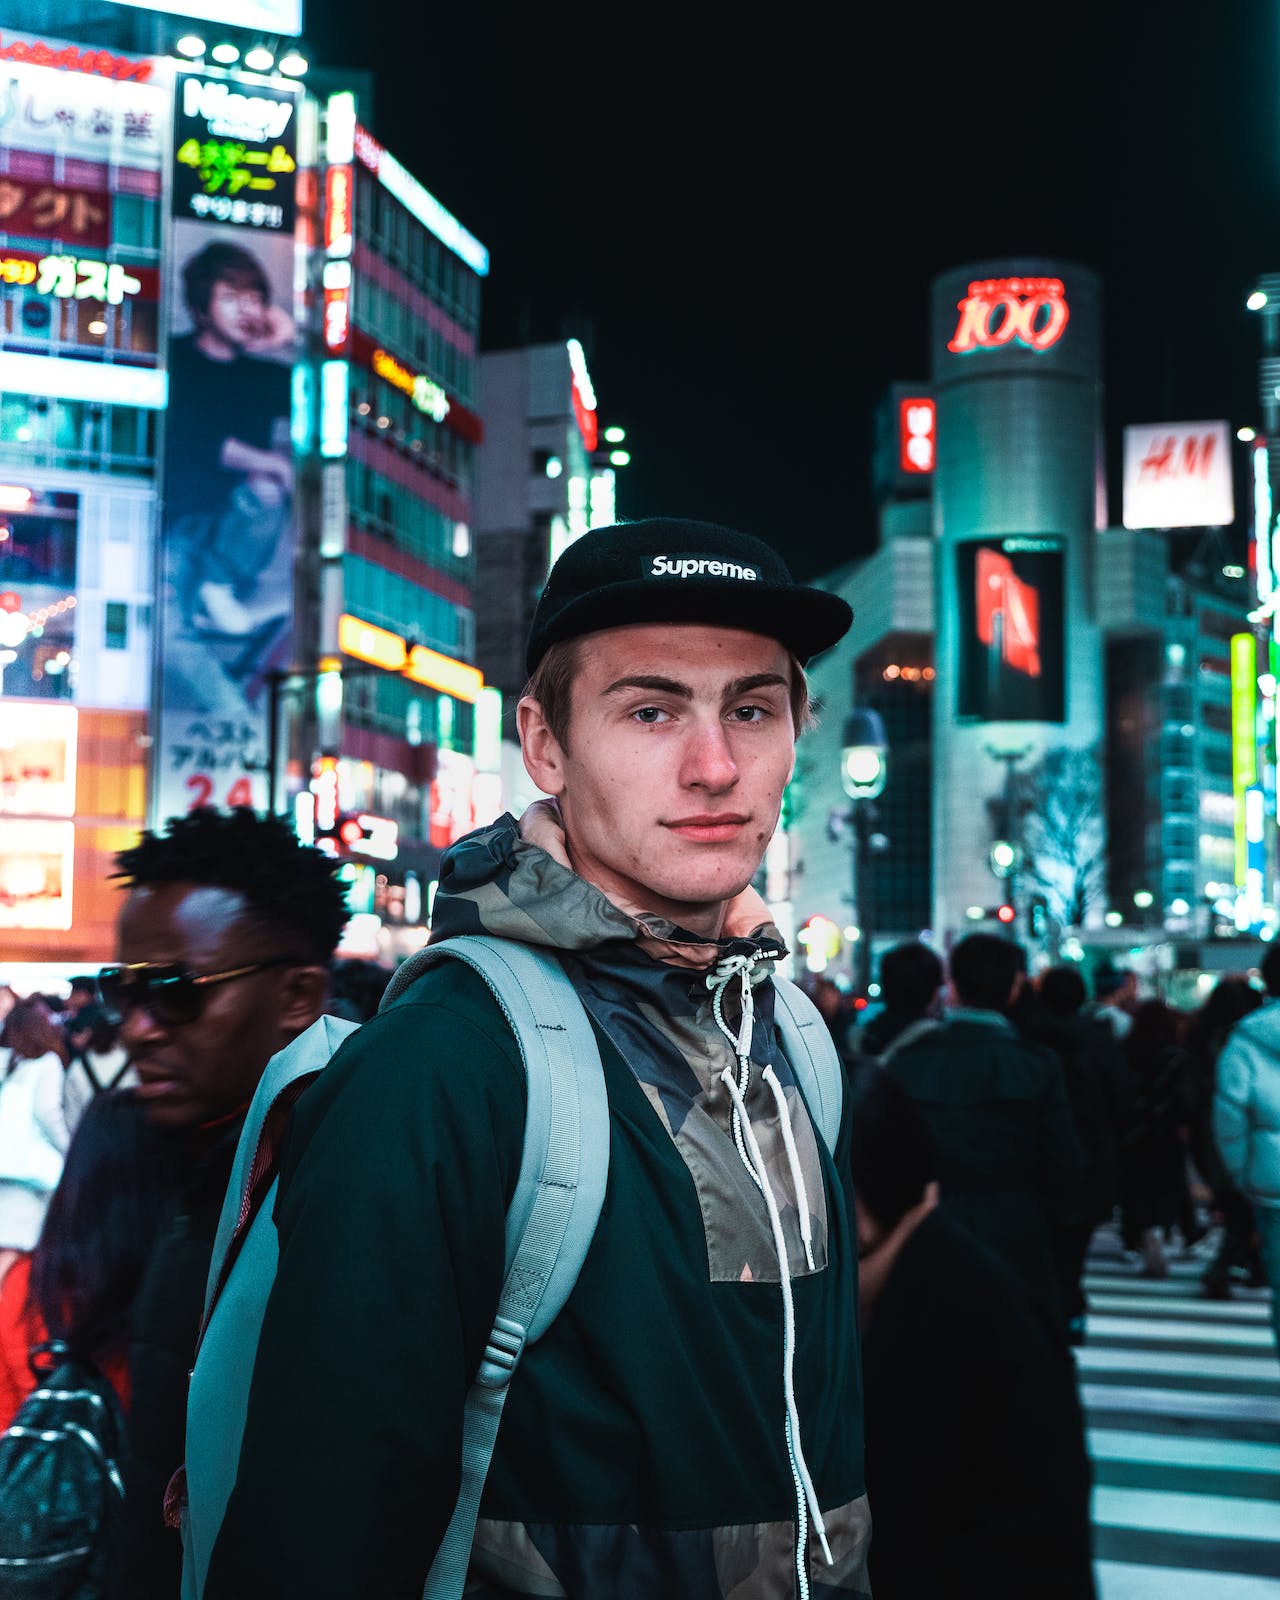 Man with a hat in Tokyo